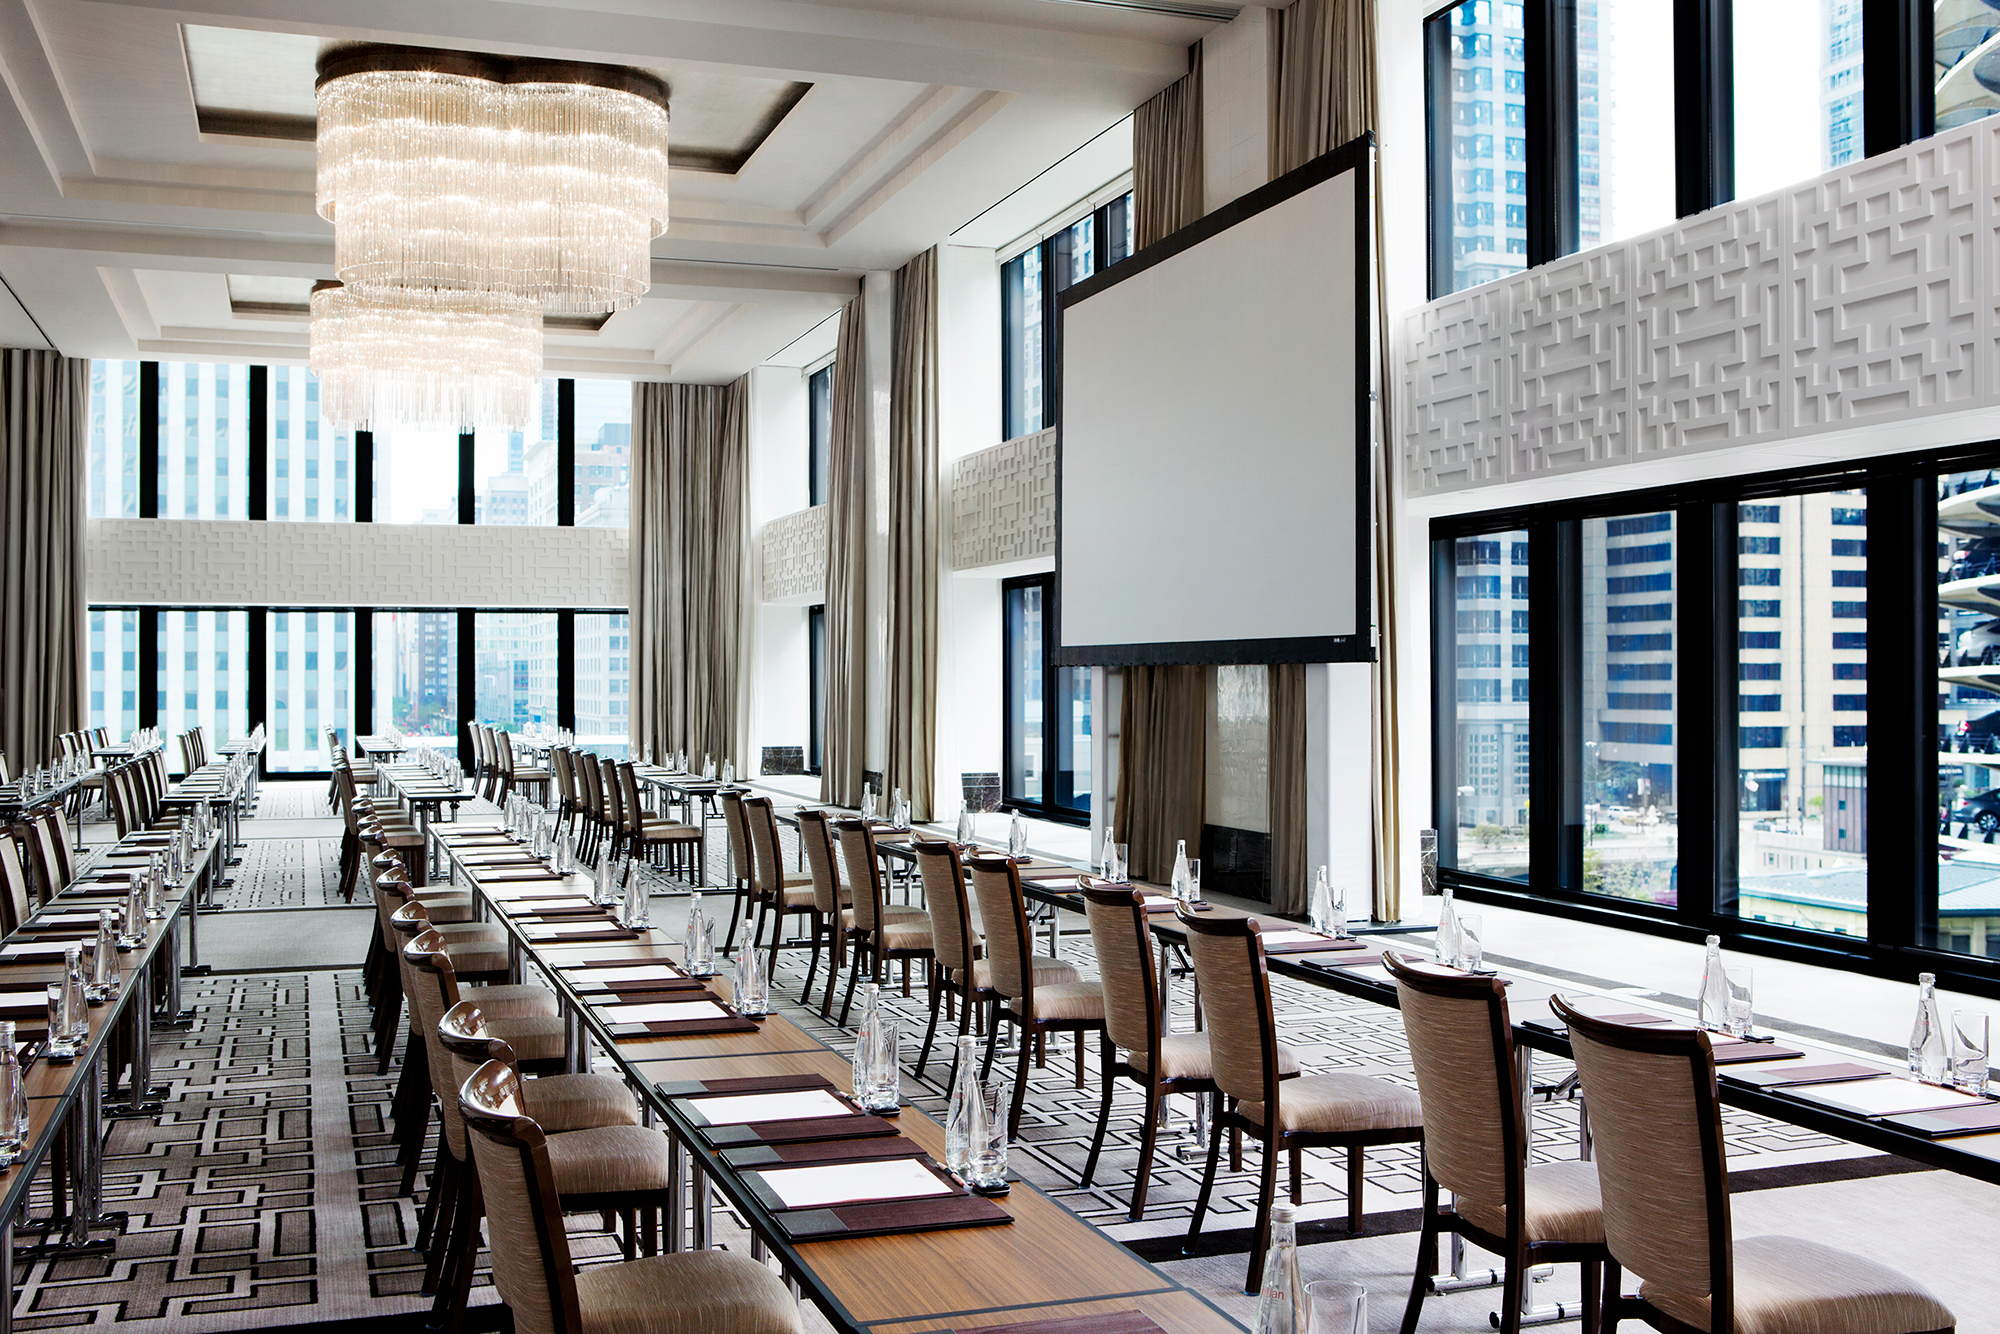 A large event venue at The Langham, Chicago with a business dining setting.